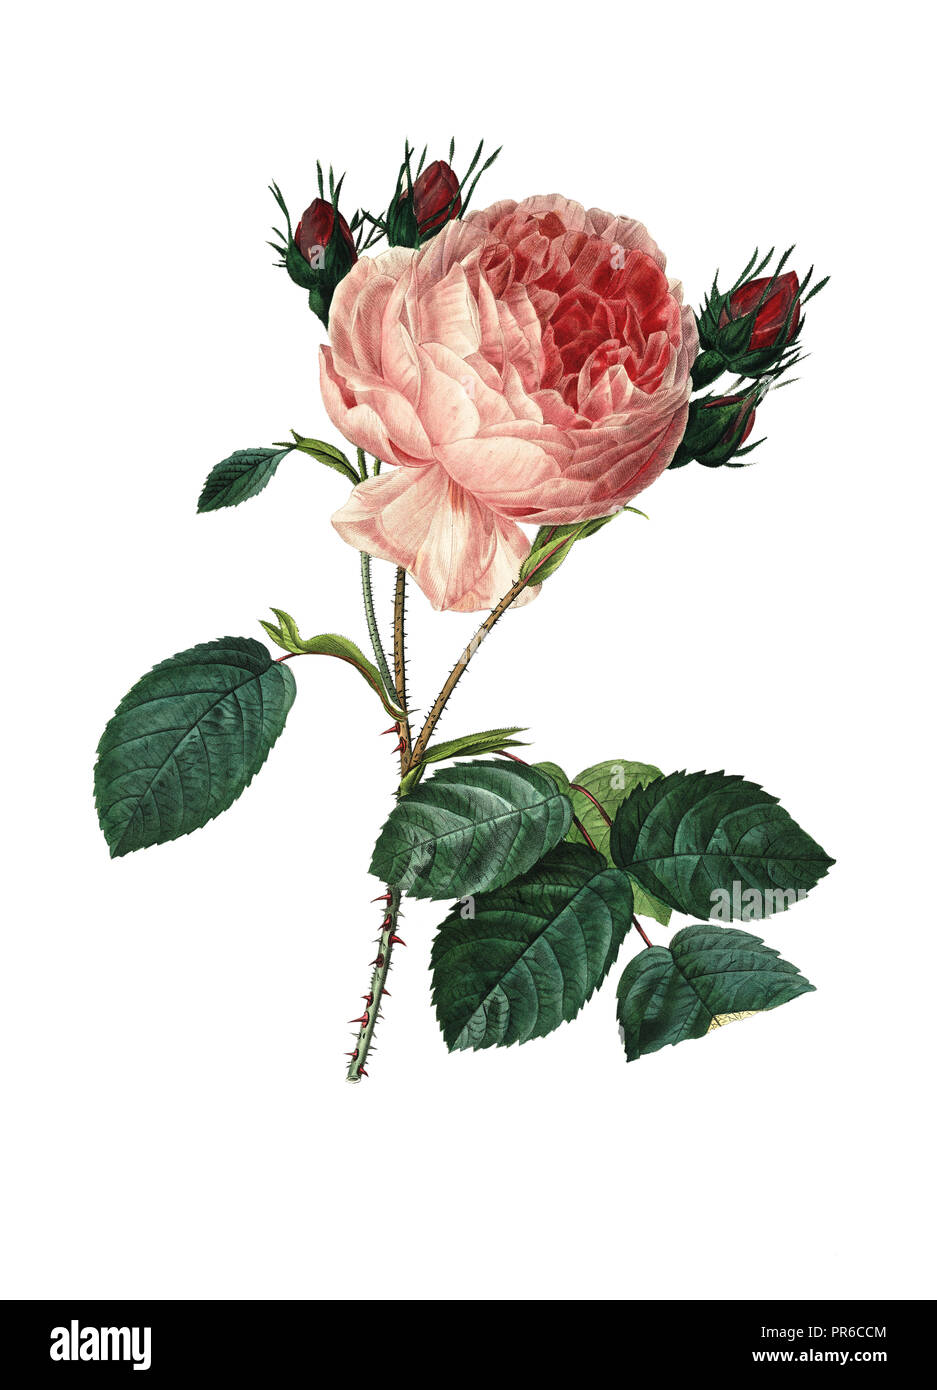 19th-century illustration of a rosa centifolia or hundred leaved rose. Engraving by Pierre-Joseph Redoute. Published in Choix Des Plus Belles Fleurs,  Stock Photo